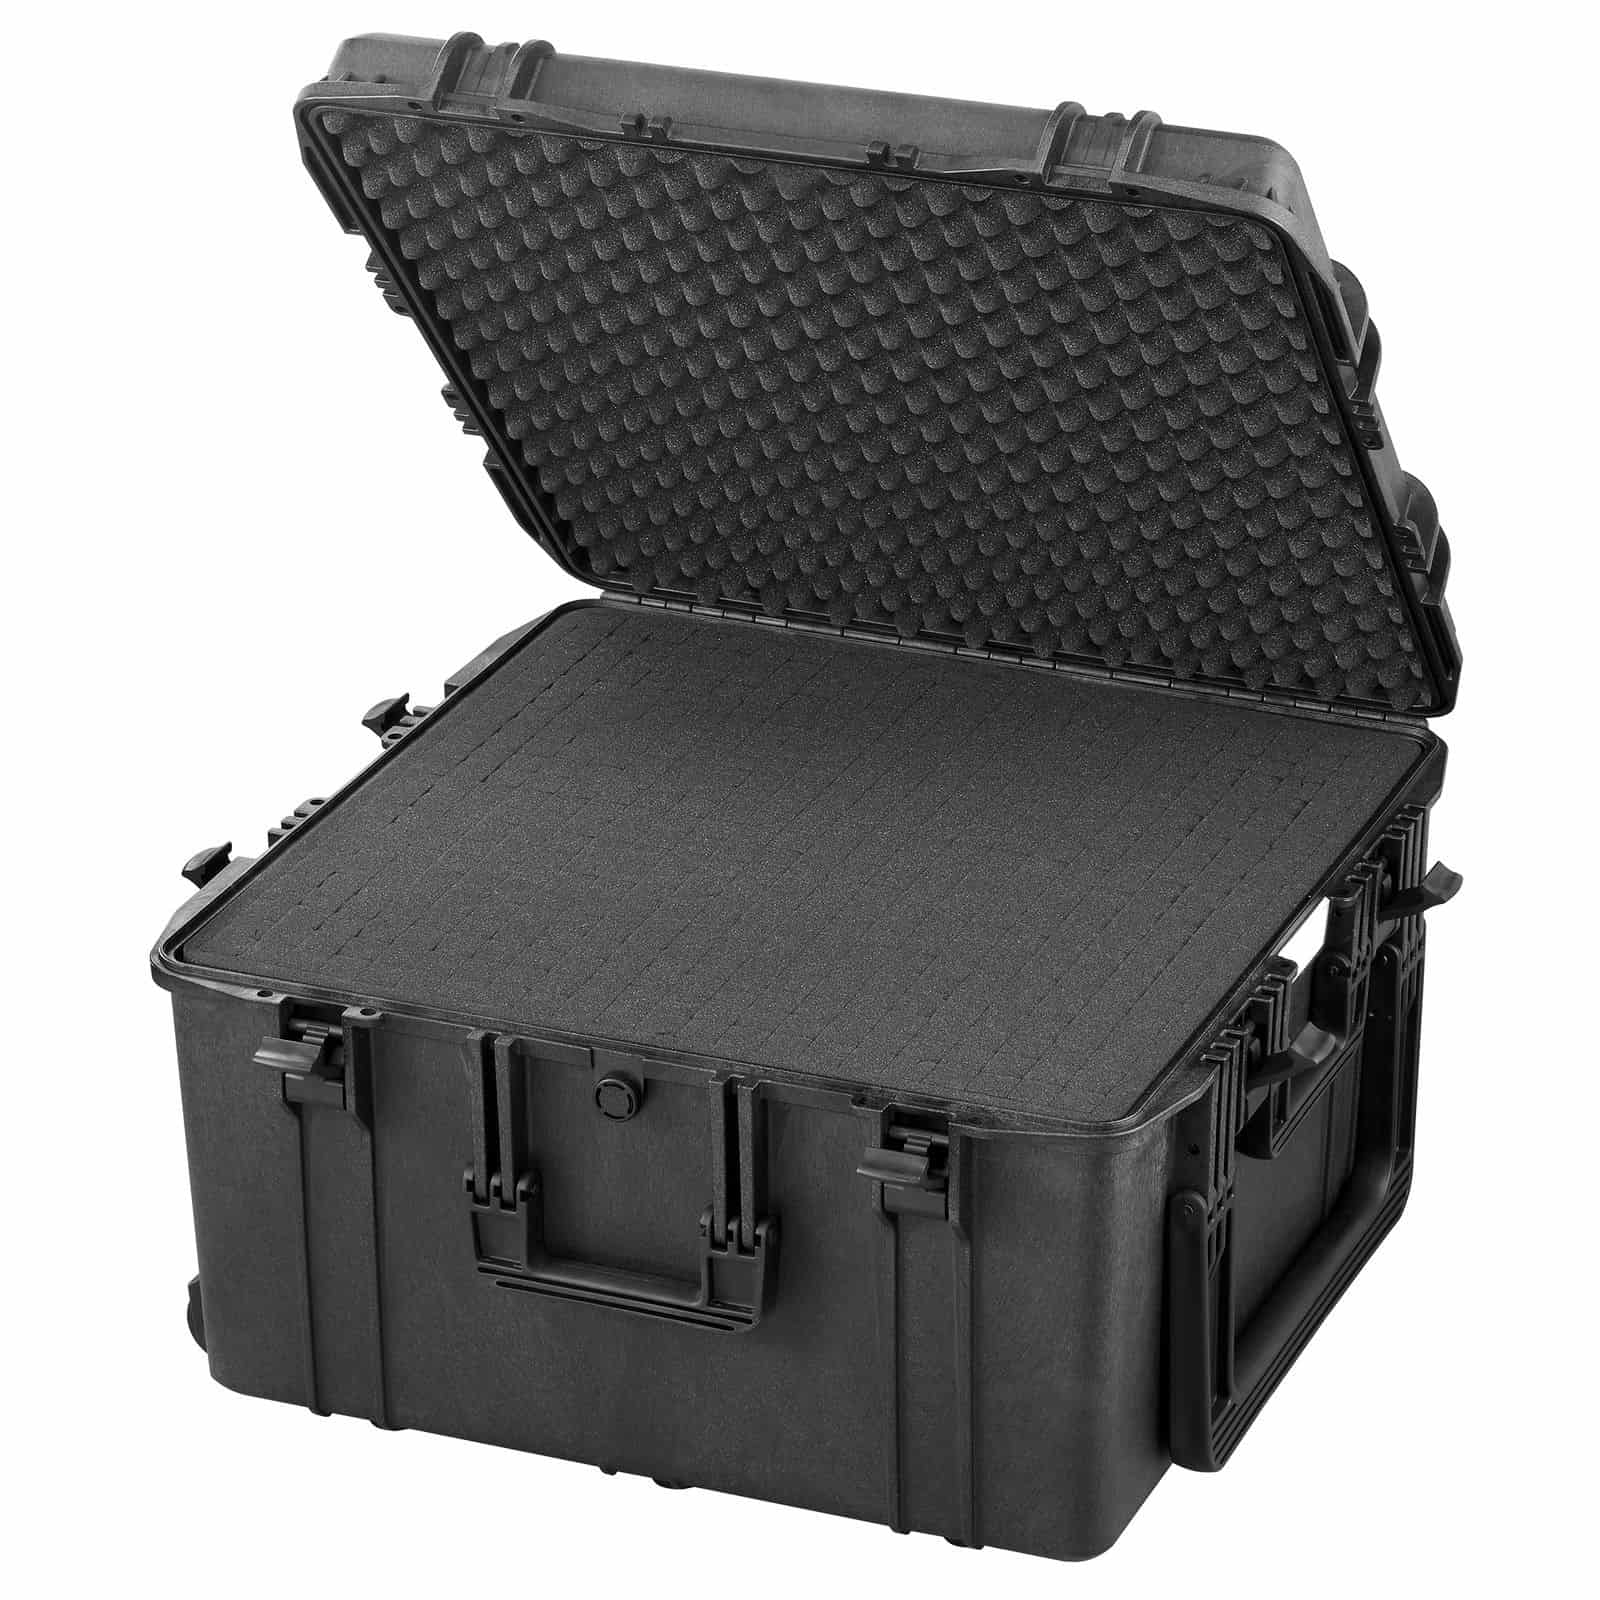 135 Litre Wheeled Square Mobile Waterproof Plastic Protective Case - With or Without Foam